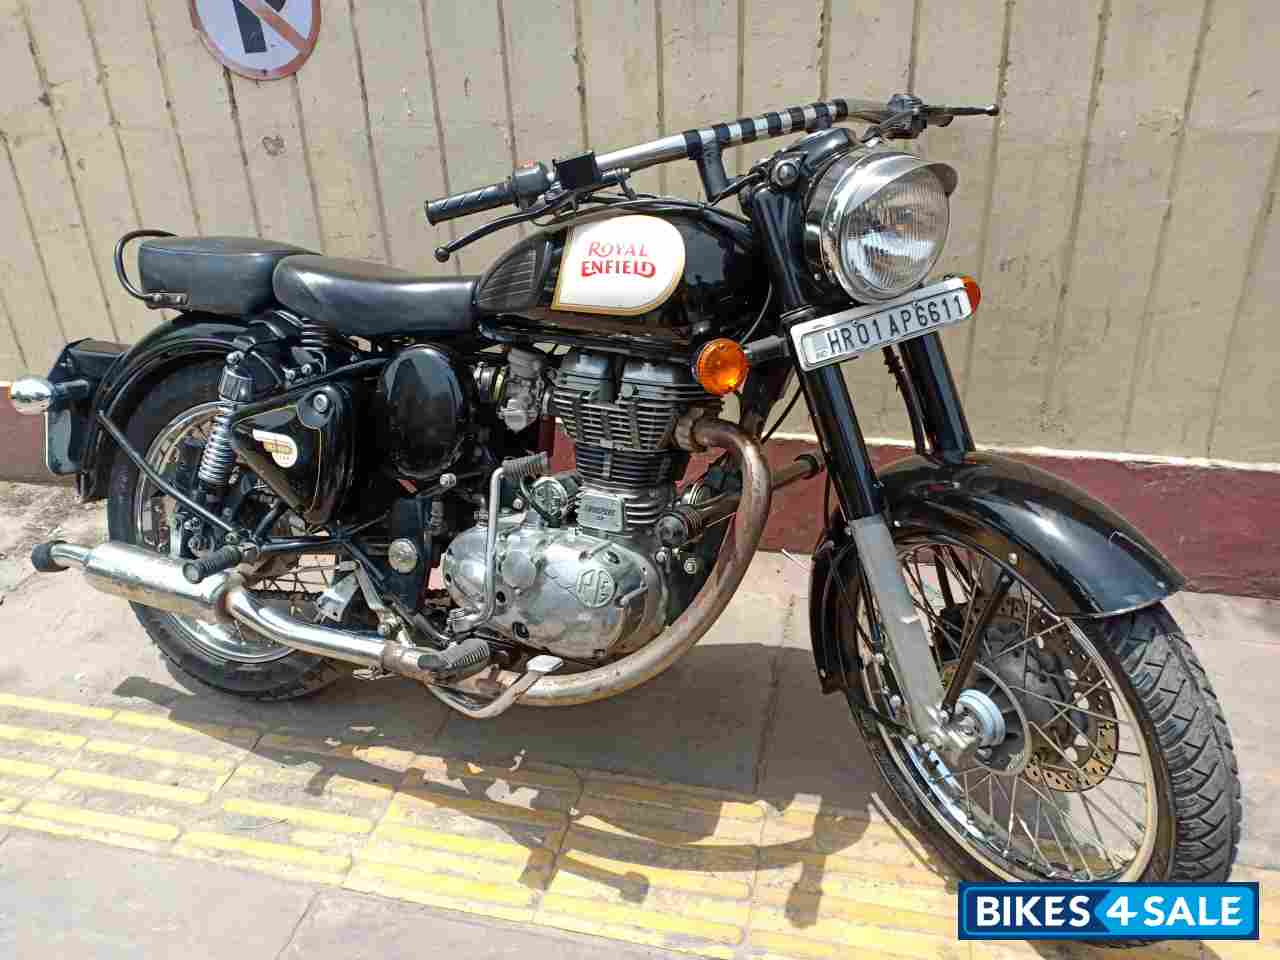 Used 2016 model Royal Enfield Classic 350 for sale in New Delhi. ID ...